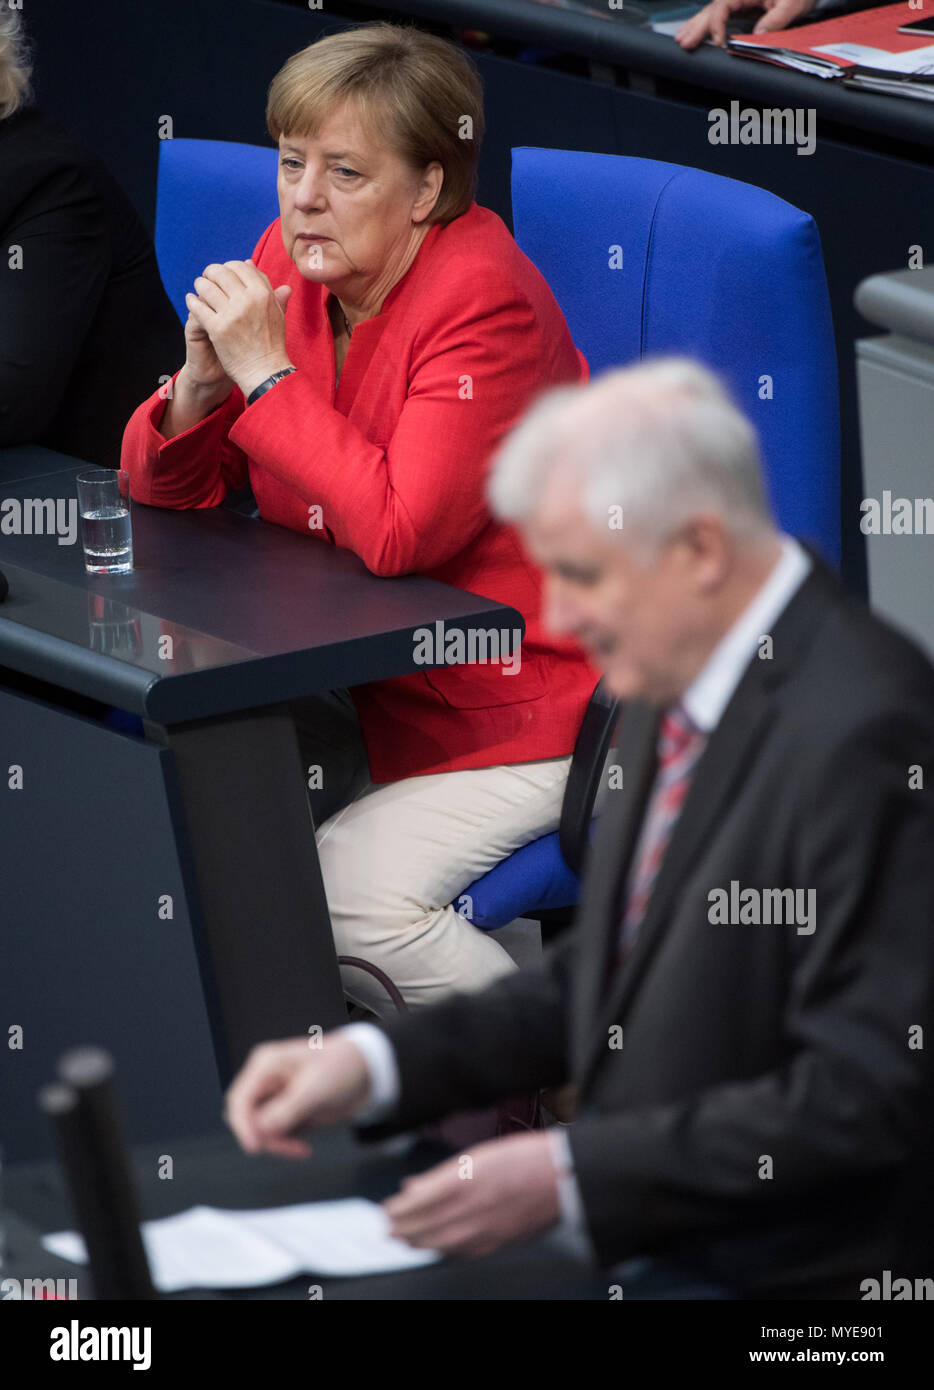 Berlin, Germany. 7th June, 2018. German chancellor Angela Merkel (Christian Democratic Union) watches as Horst Seehofer of the Christian Social Union (CSU), federal interior minister, speaks during a plenary meeting of the German parliament at the Reichstag building. Main themes of the 36th session of the 19th legislature period include new refugee family reunion laws, foreign deployments of the German army, rising rent prices in Germany as well as a committee of inquiry requested by the Free Democratic Party concerning the Federal Office for Migration and Refugees (BAMF) affair. Credit: dpa p Stock Photo